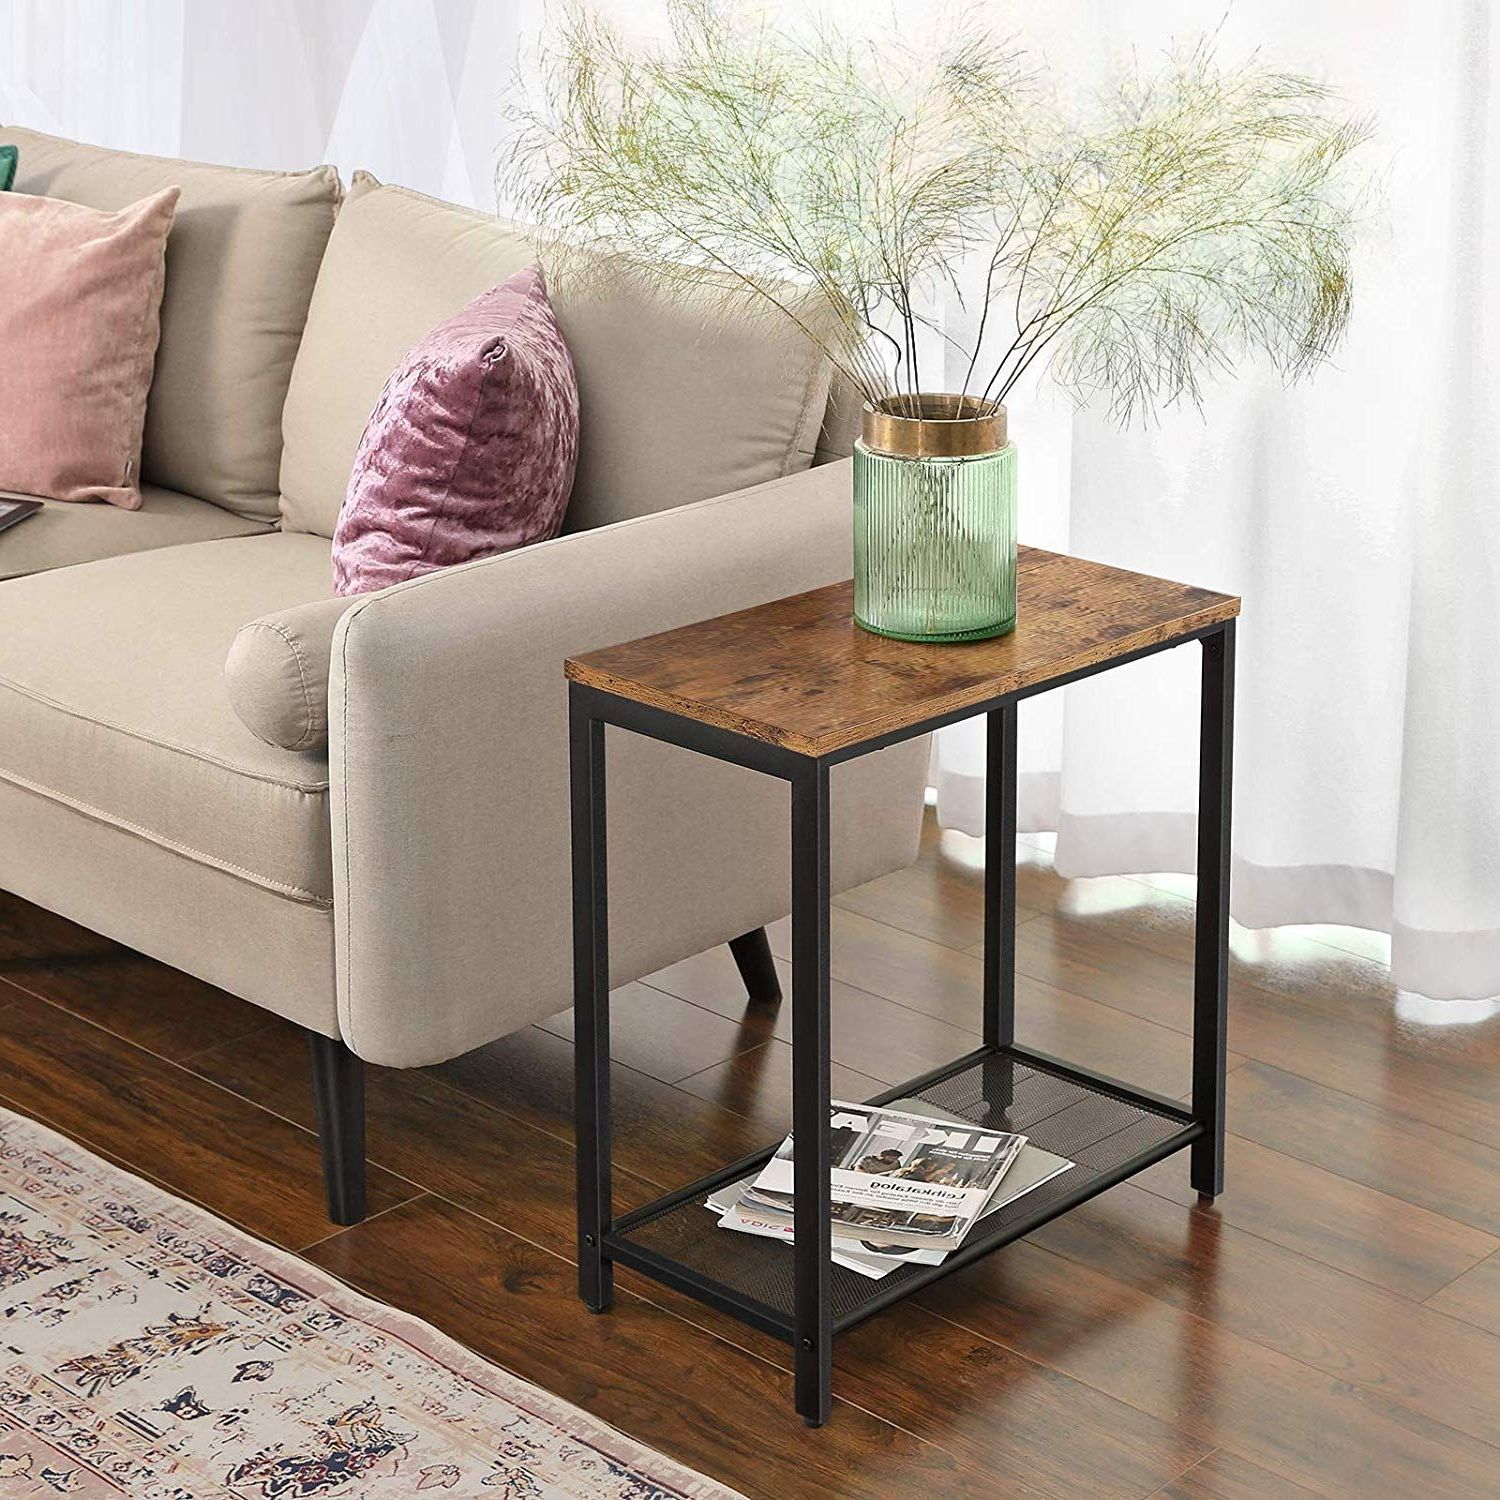 Room And Board Metal Side Tables – Kif Profile Photo Gallery With Metal Side Tables For Living Spaces (Gallery 15 of 20)